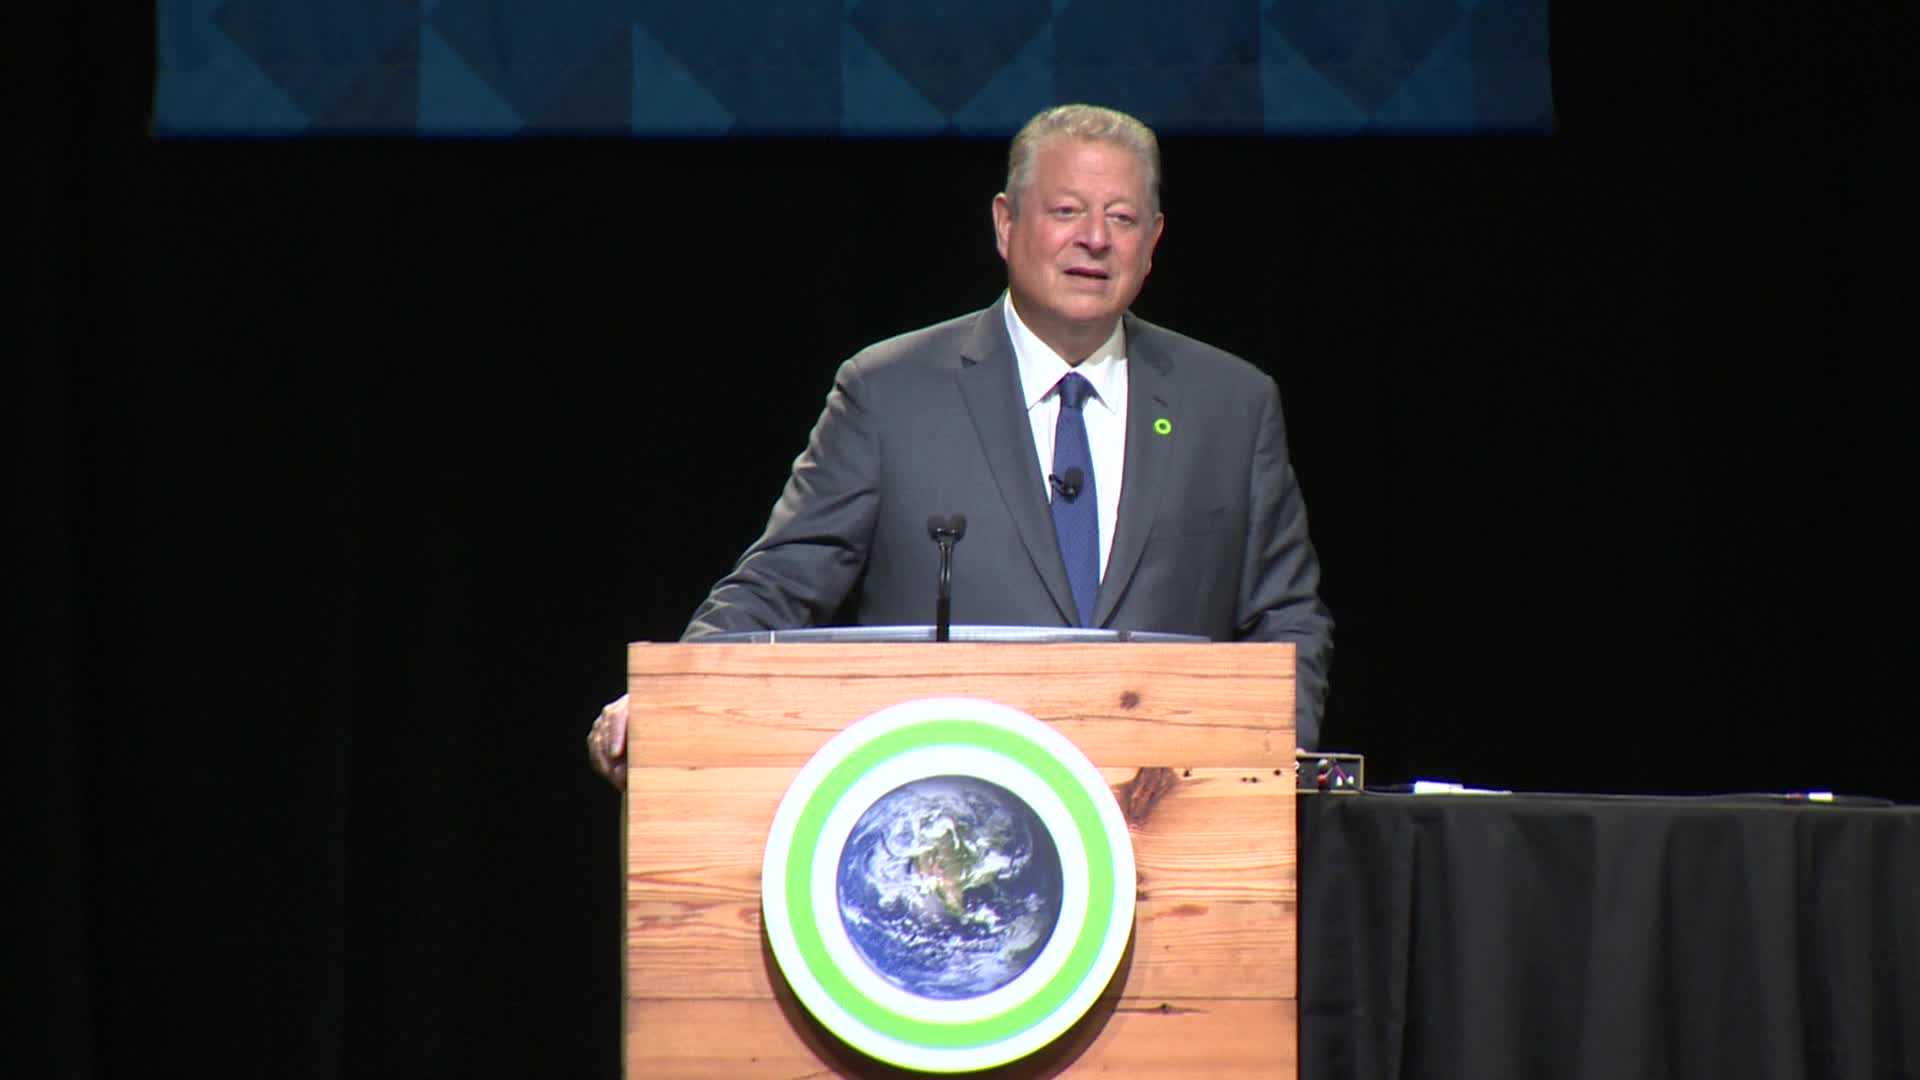 Former Vice President Al Gore in Pittsburgh to talk climate change